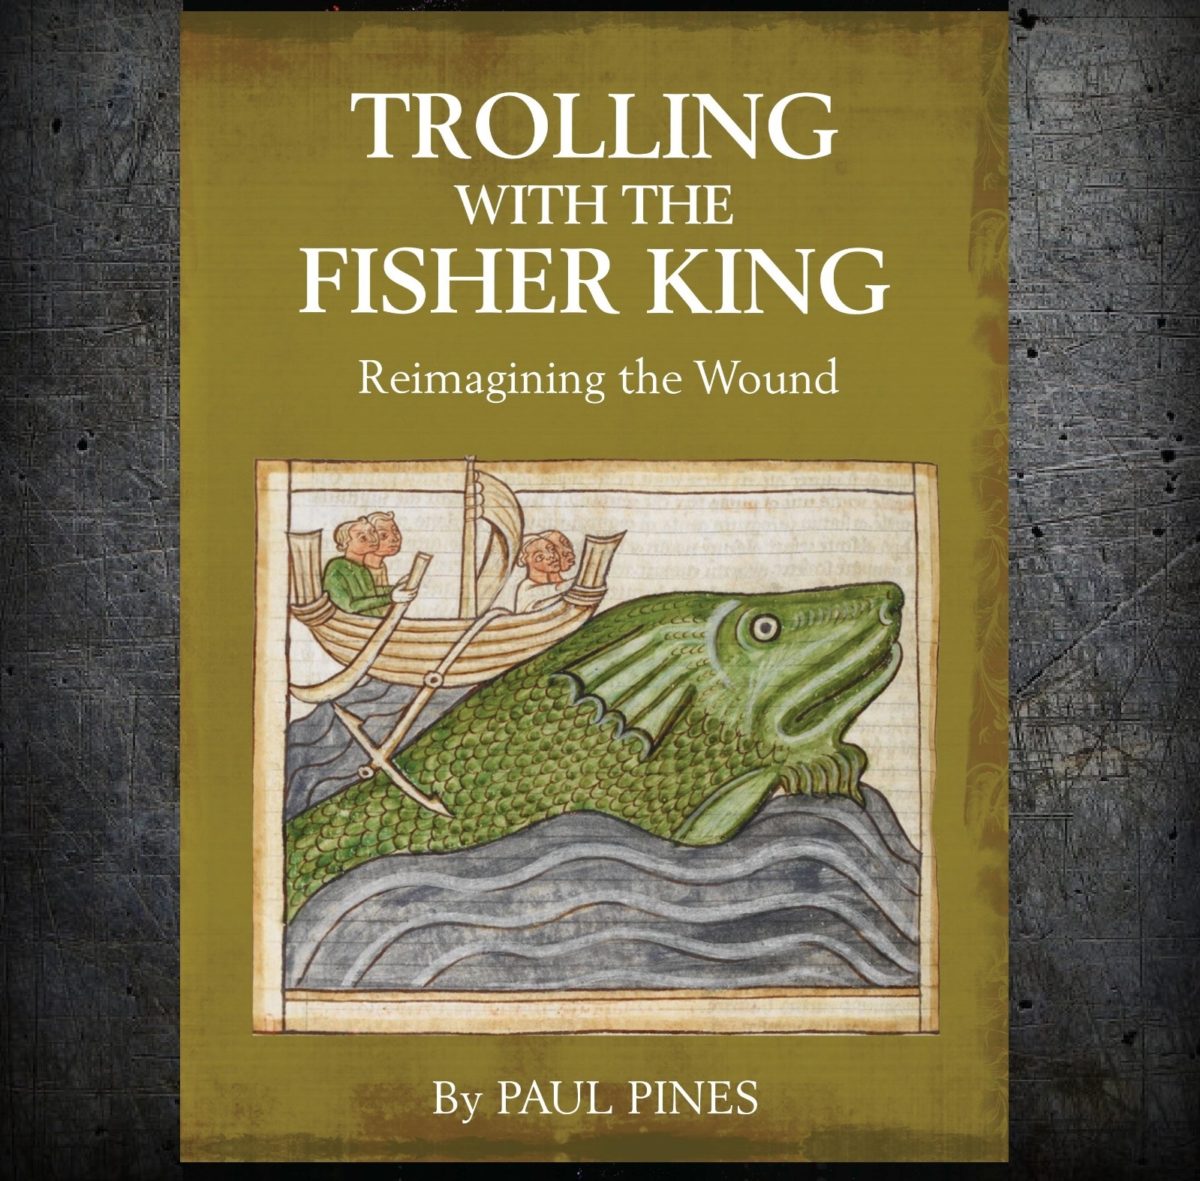 Trolling with the Fisher King